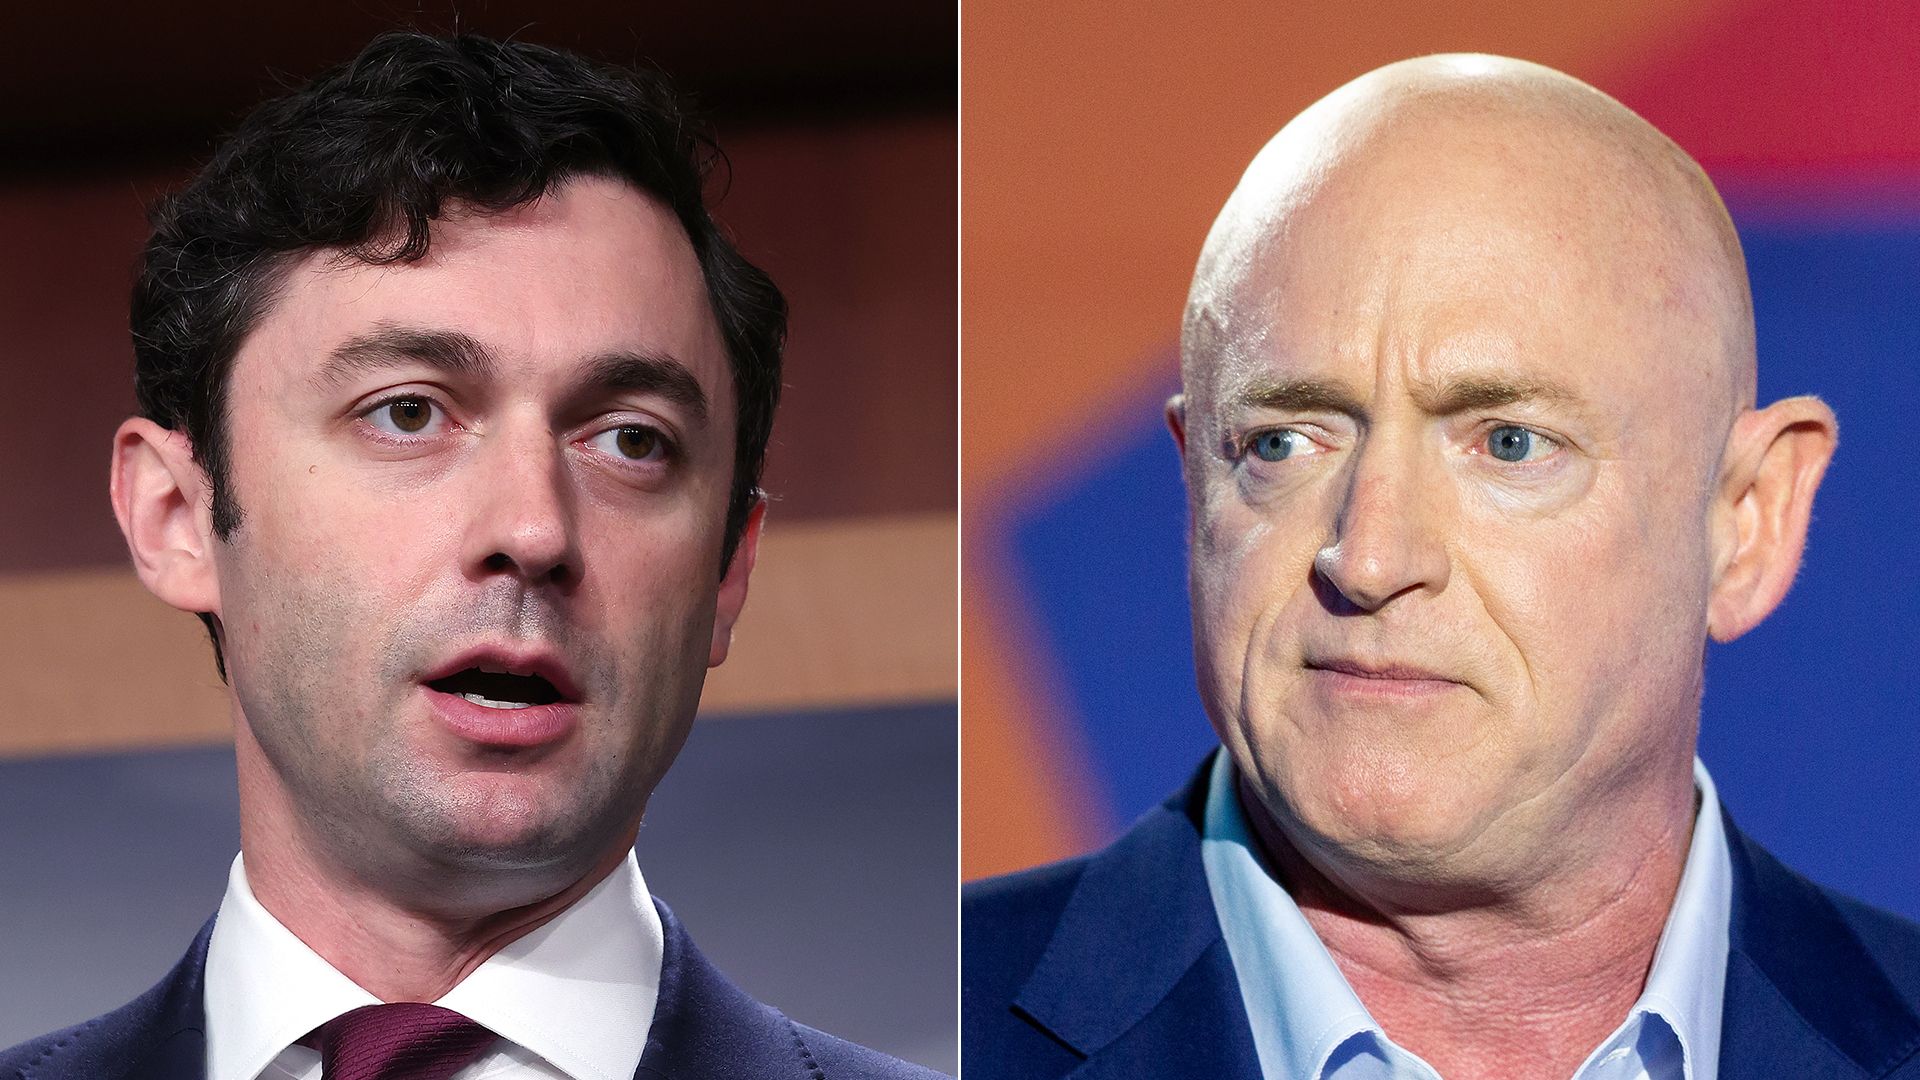 Jon Ossoff and Mark Kelly are seen in side-by-side photos.